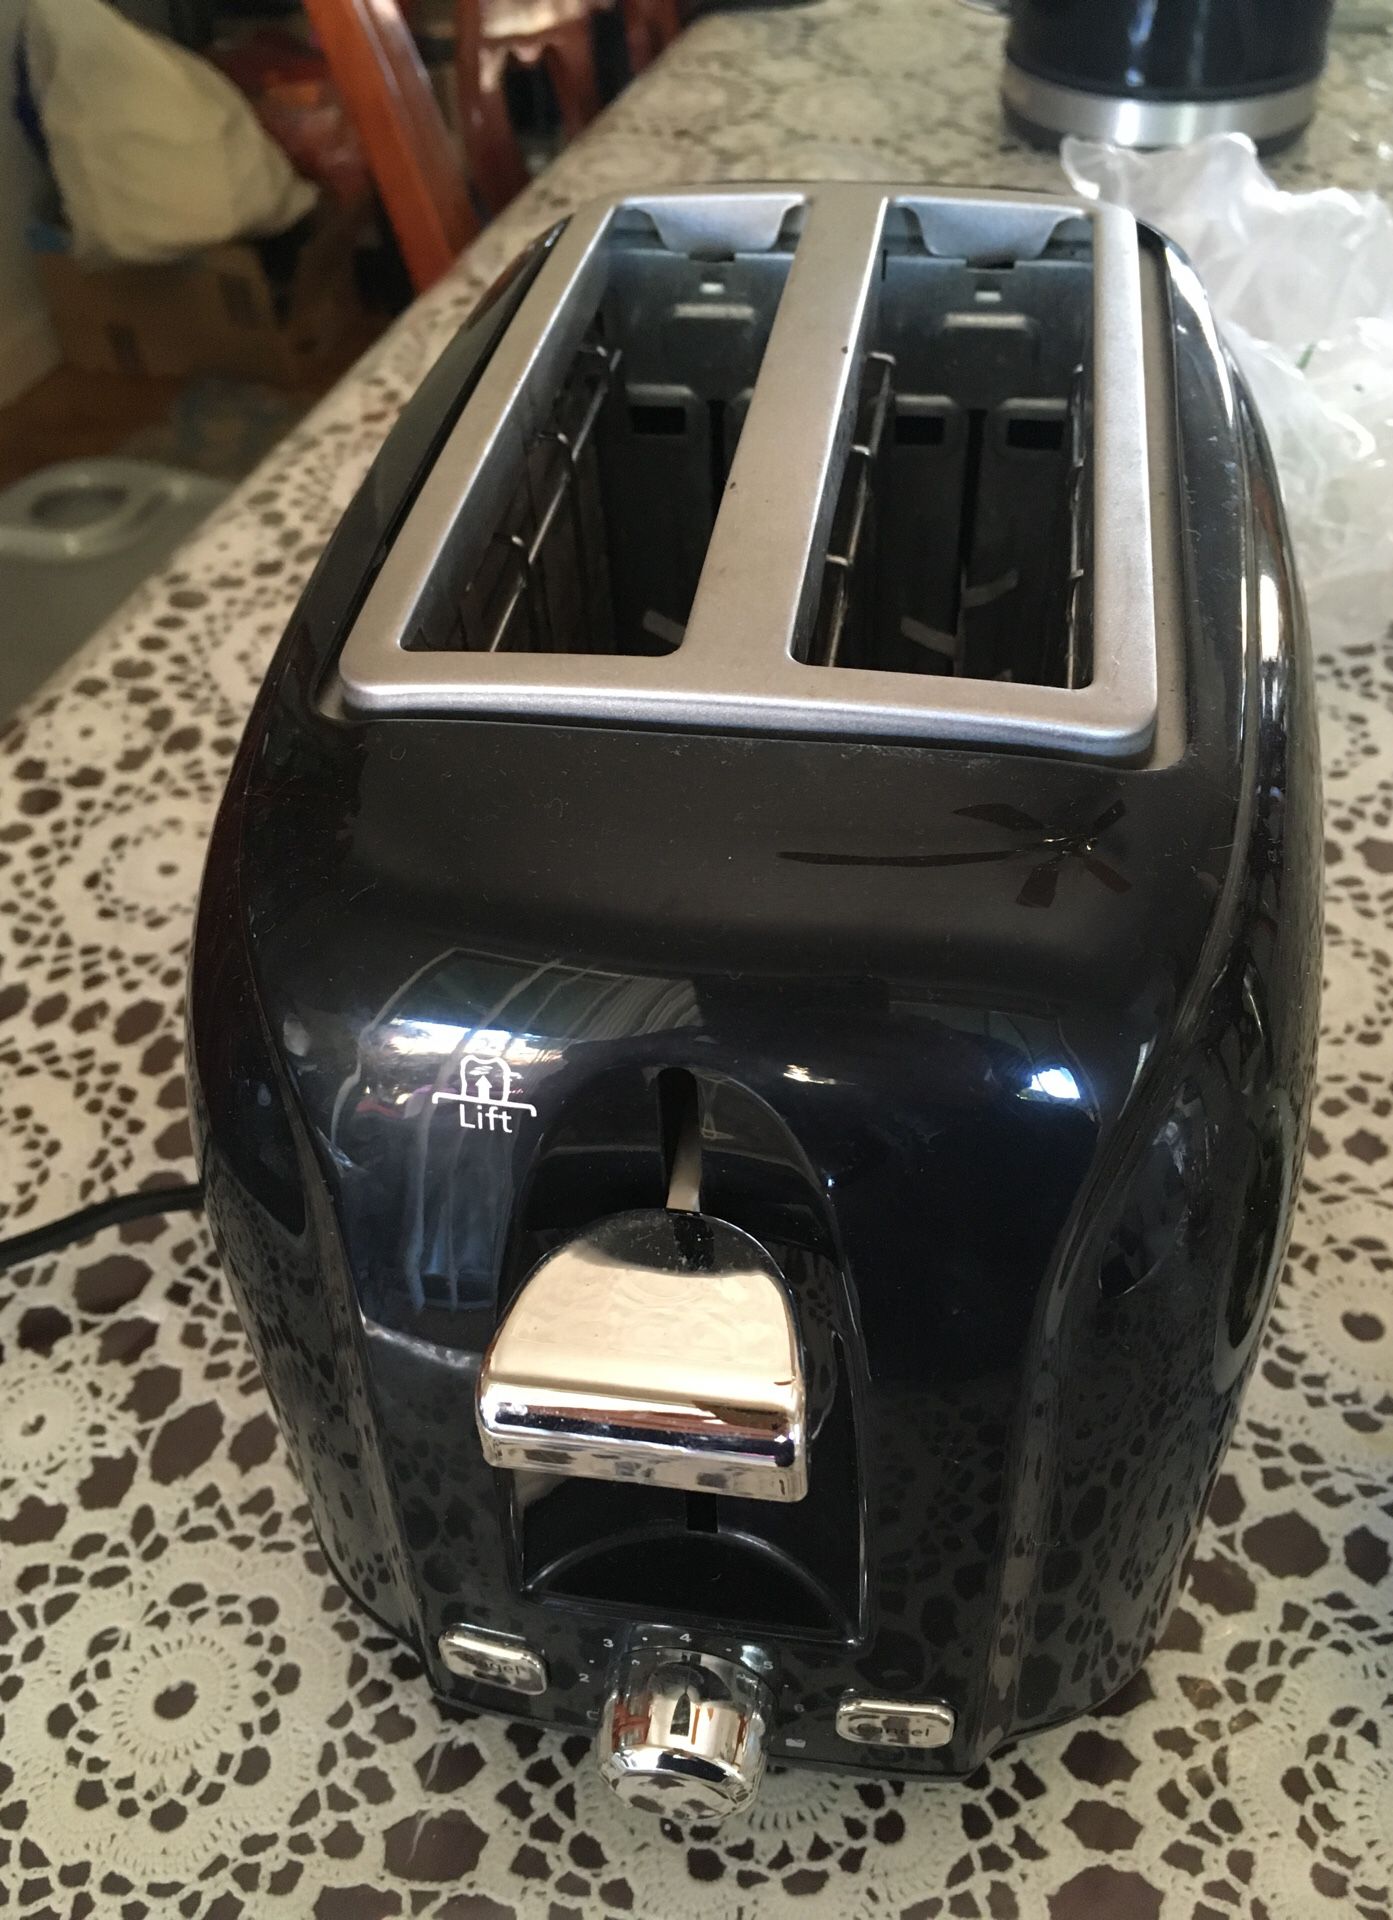 Sunbeam 2 bread toaster great working condition